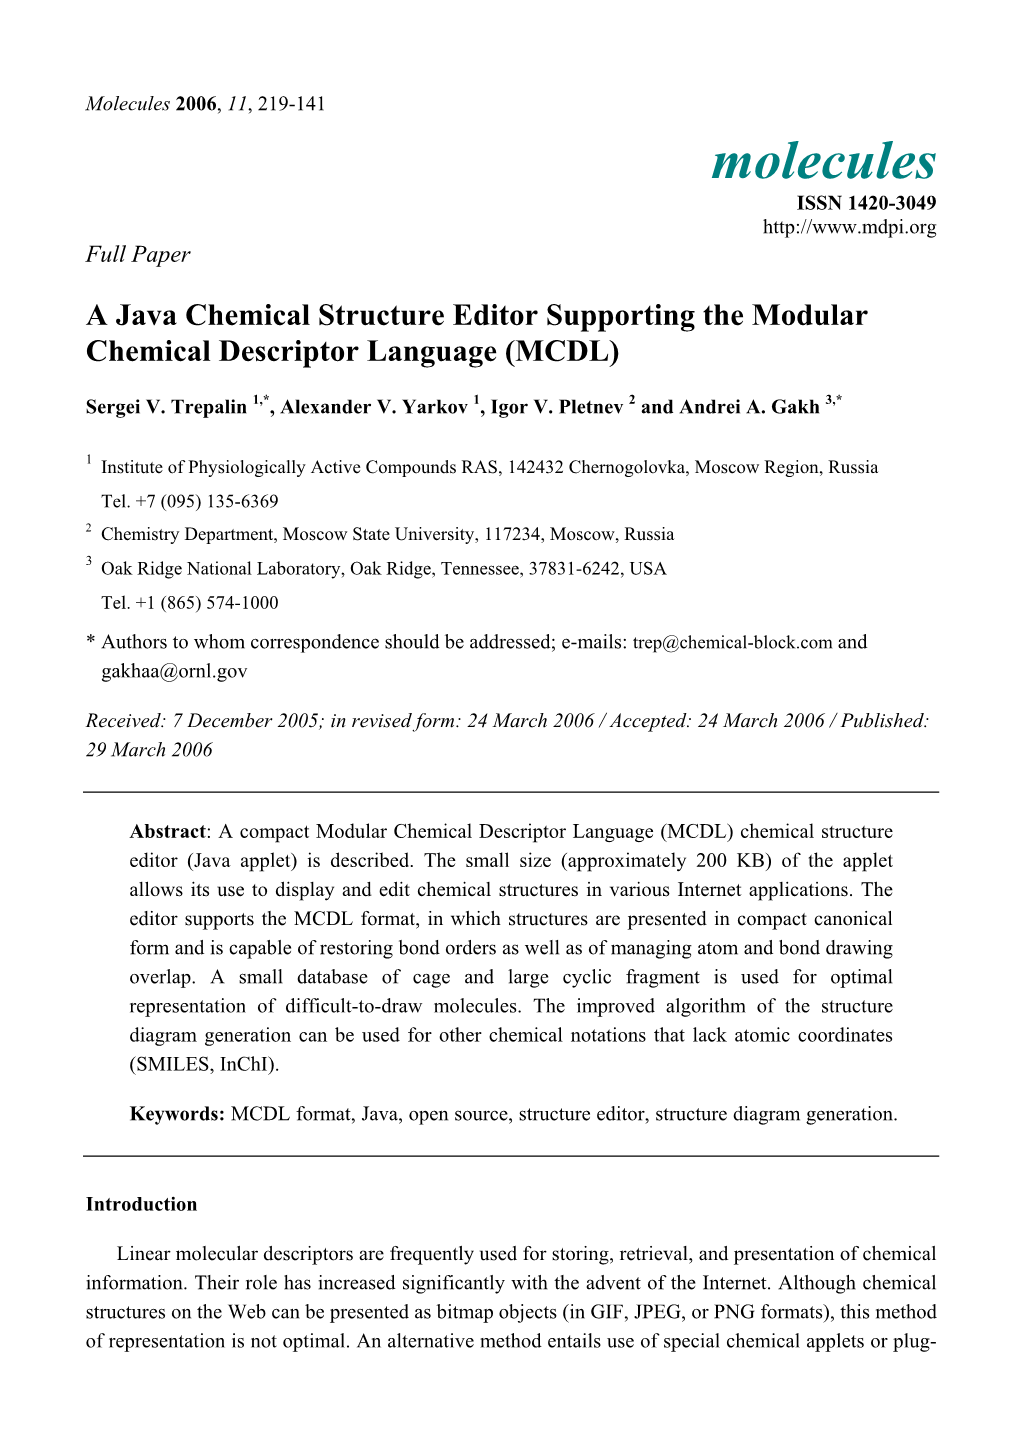 A Java Chemical Structure Editor Supporting the Modular Chemical Descriptor Language (MCDL)